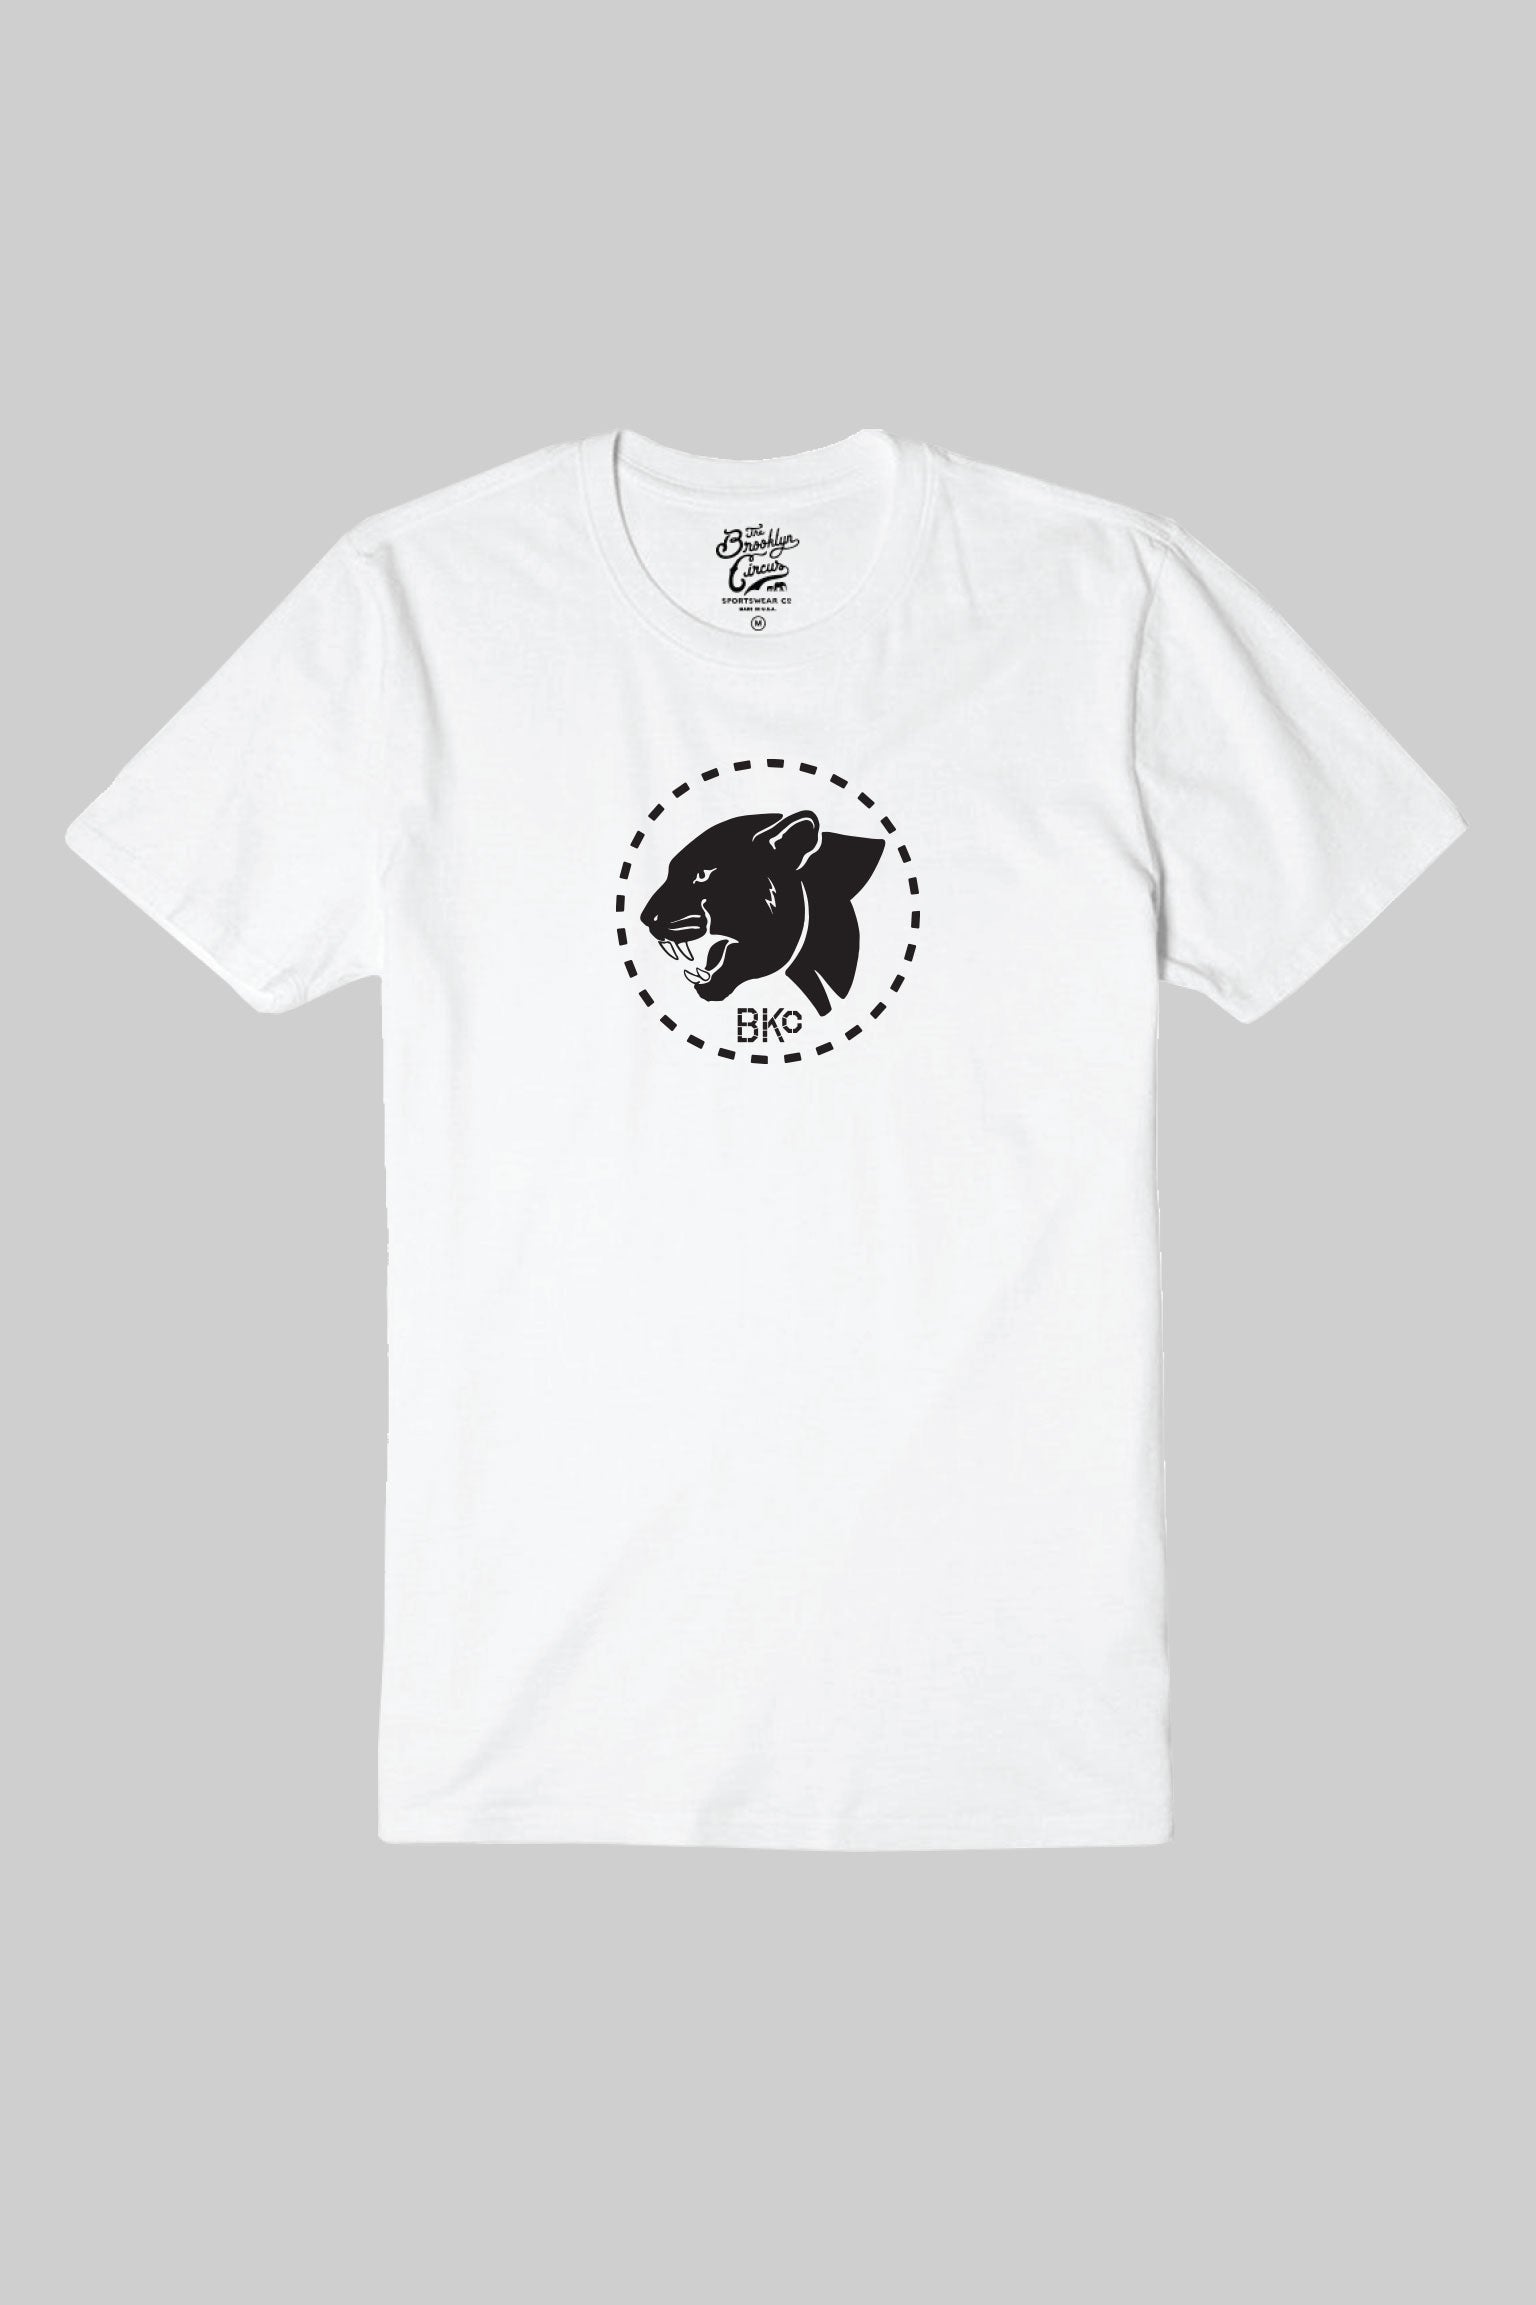 Black Panther 761st Short Sleeve Tee White